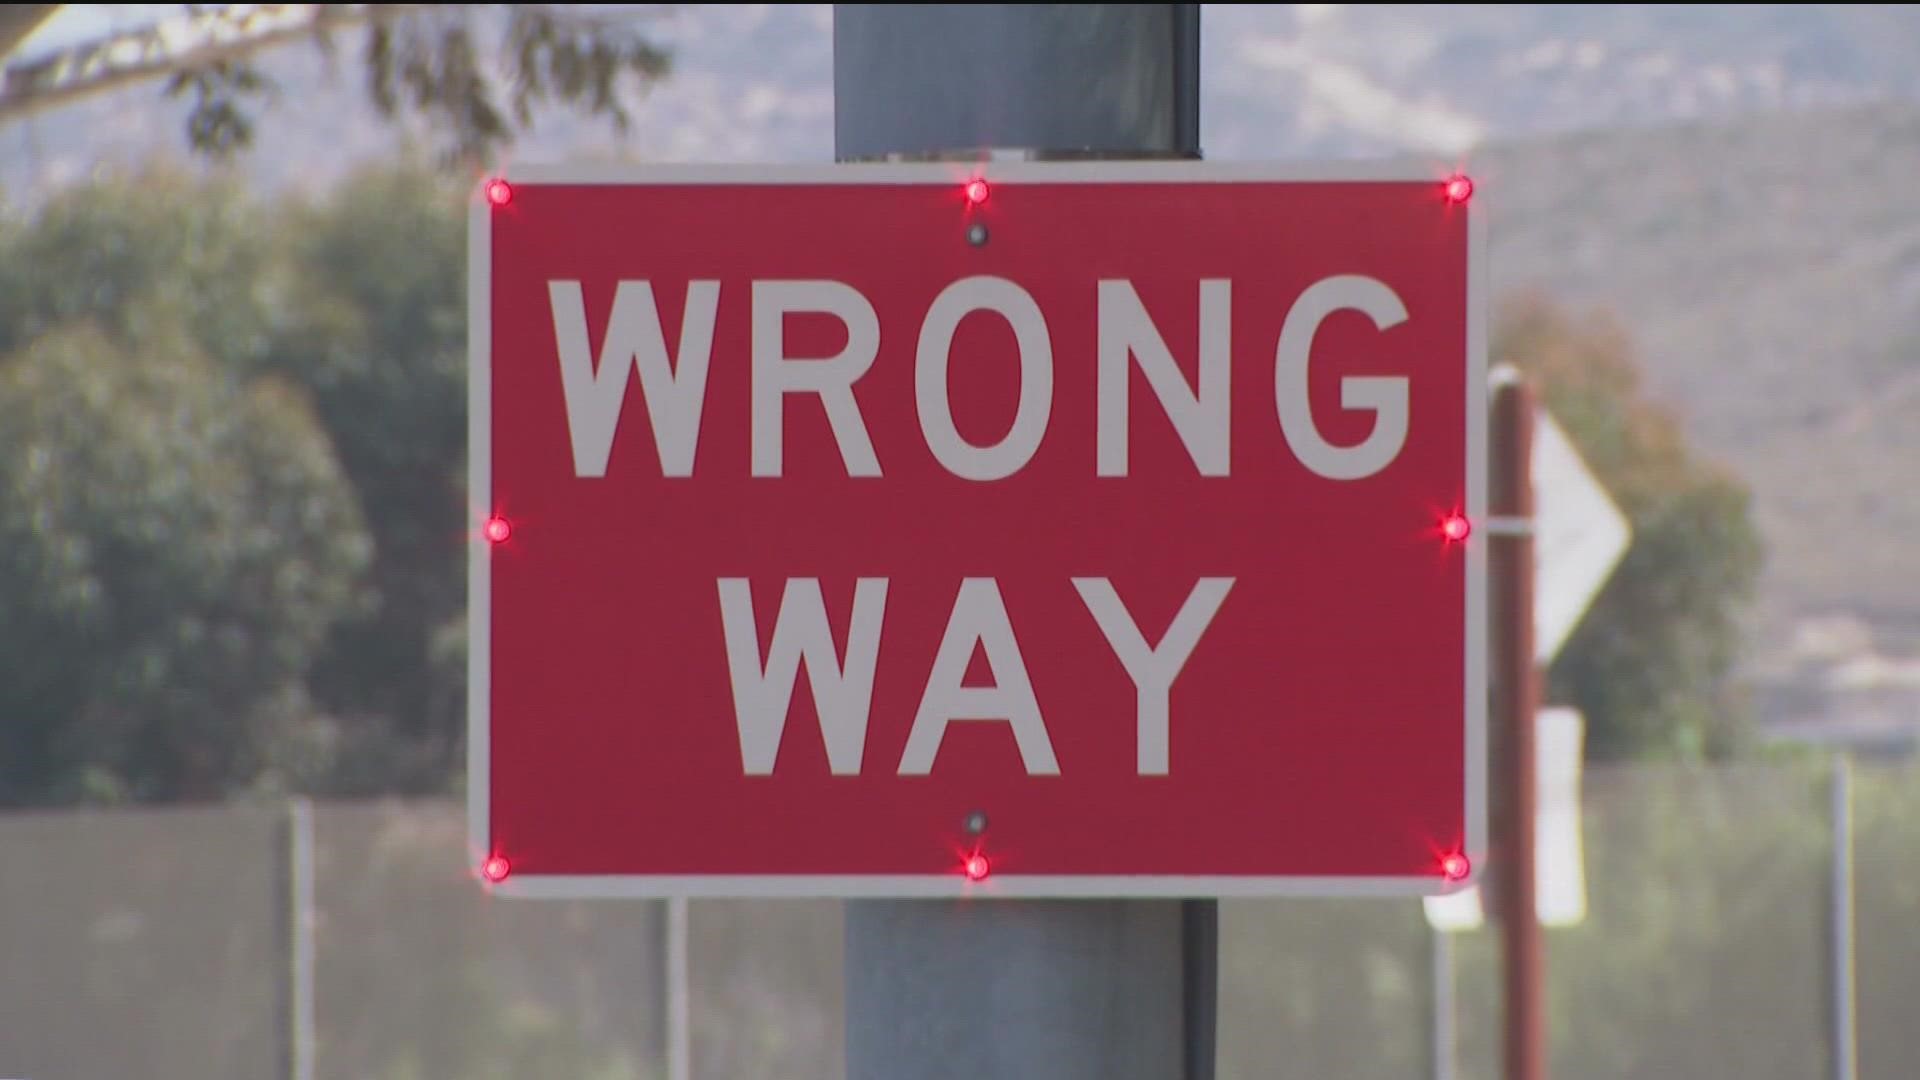 Caltrans crews are closing all lanes westbound of I-8 at Mission Bay from 9 p.m. to 5 a.m. for wrong way driver vehicle sensor testing at the Sunset Cliffs Blvd.